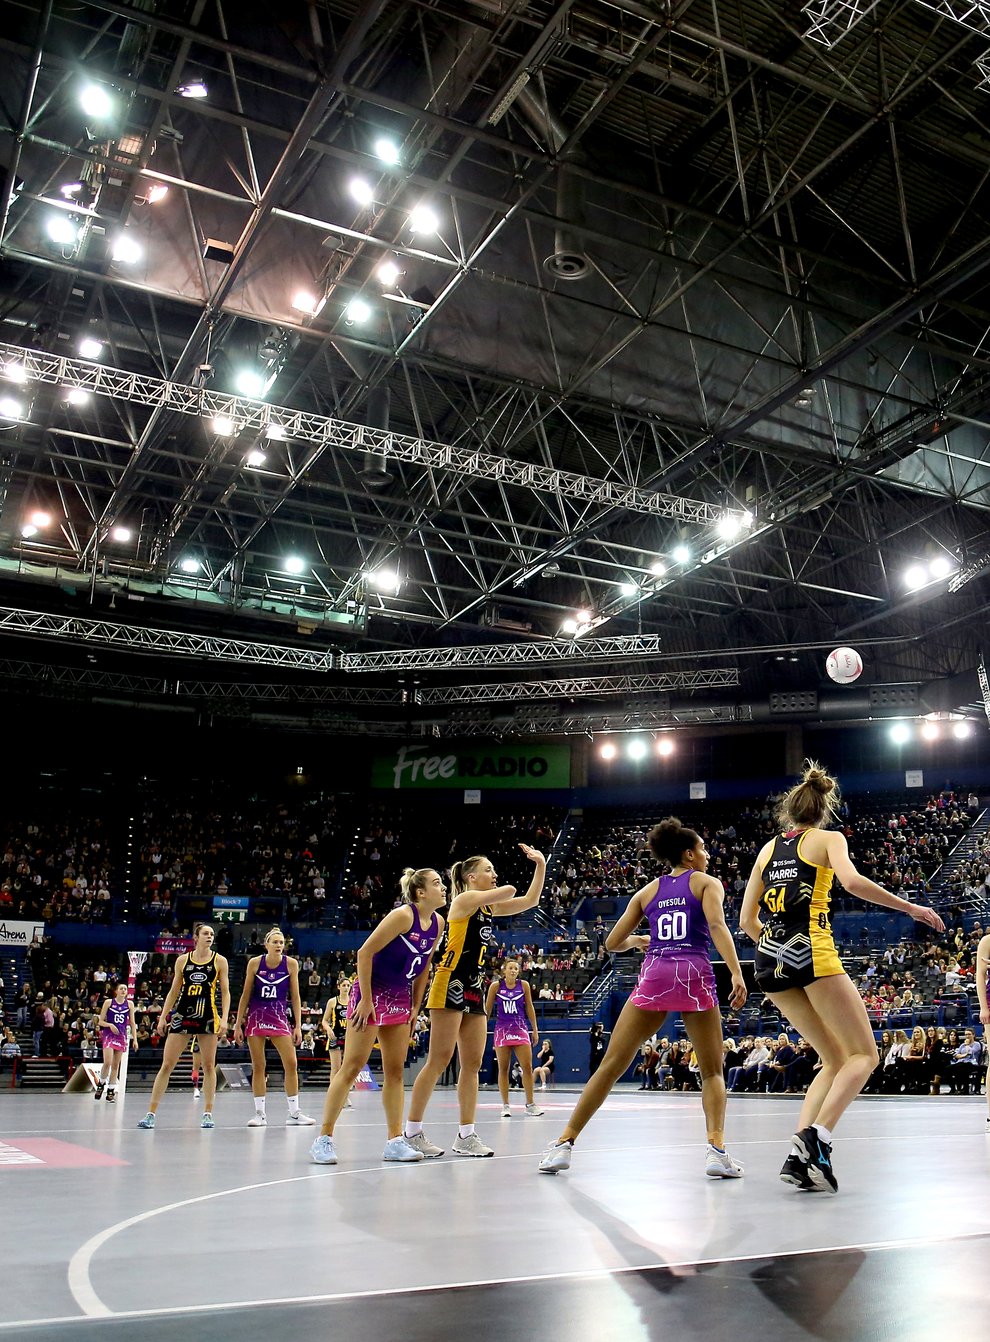 The Vitality Netball Superleague is the latest sporting event hit by the coronavirus pandemic (PA Images)